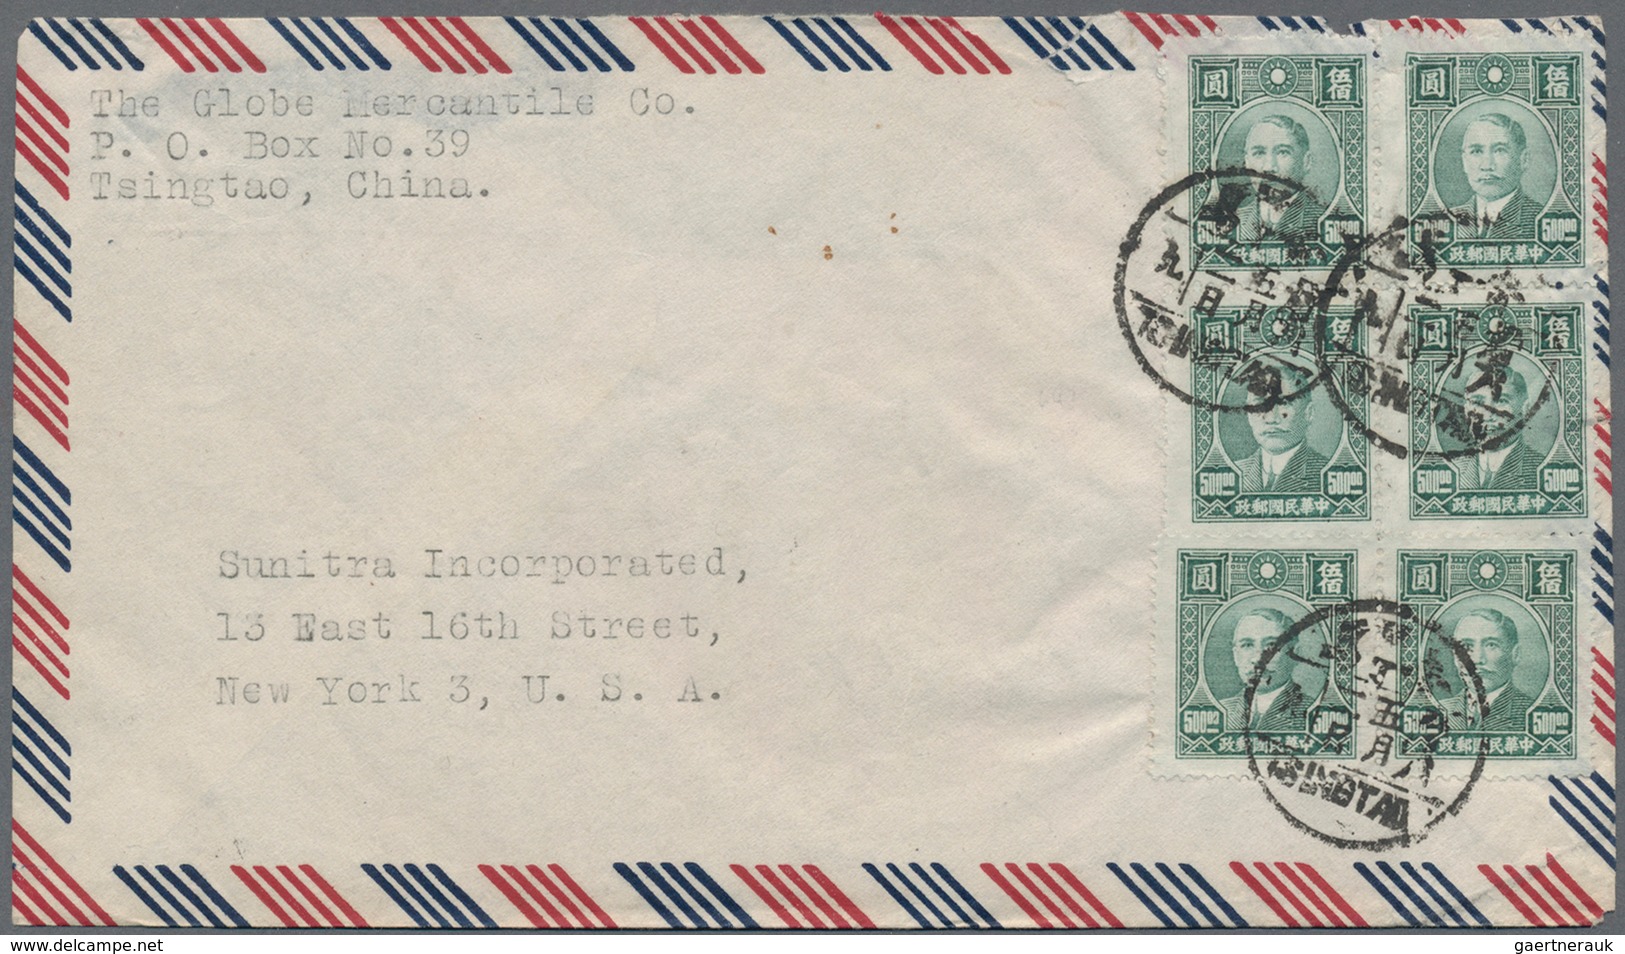 China: 1915/48, covers (9), used ppc (4), front covers (2) inc. registration and airmail, with a cov